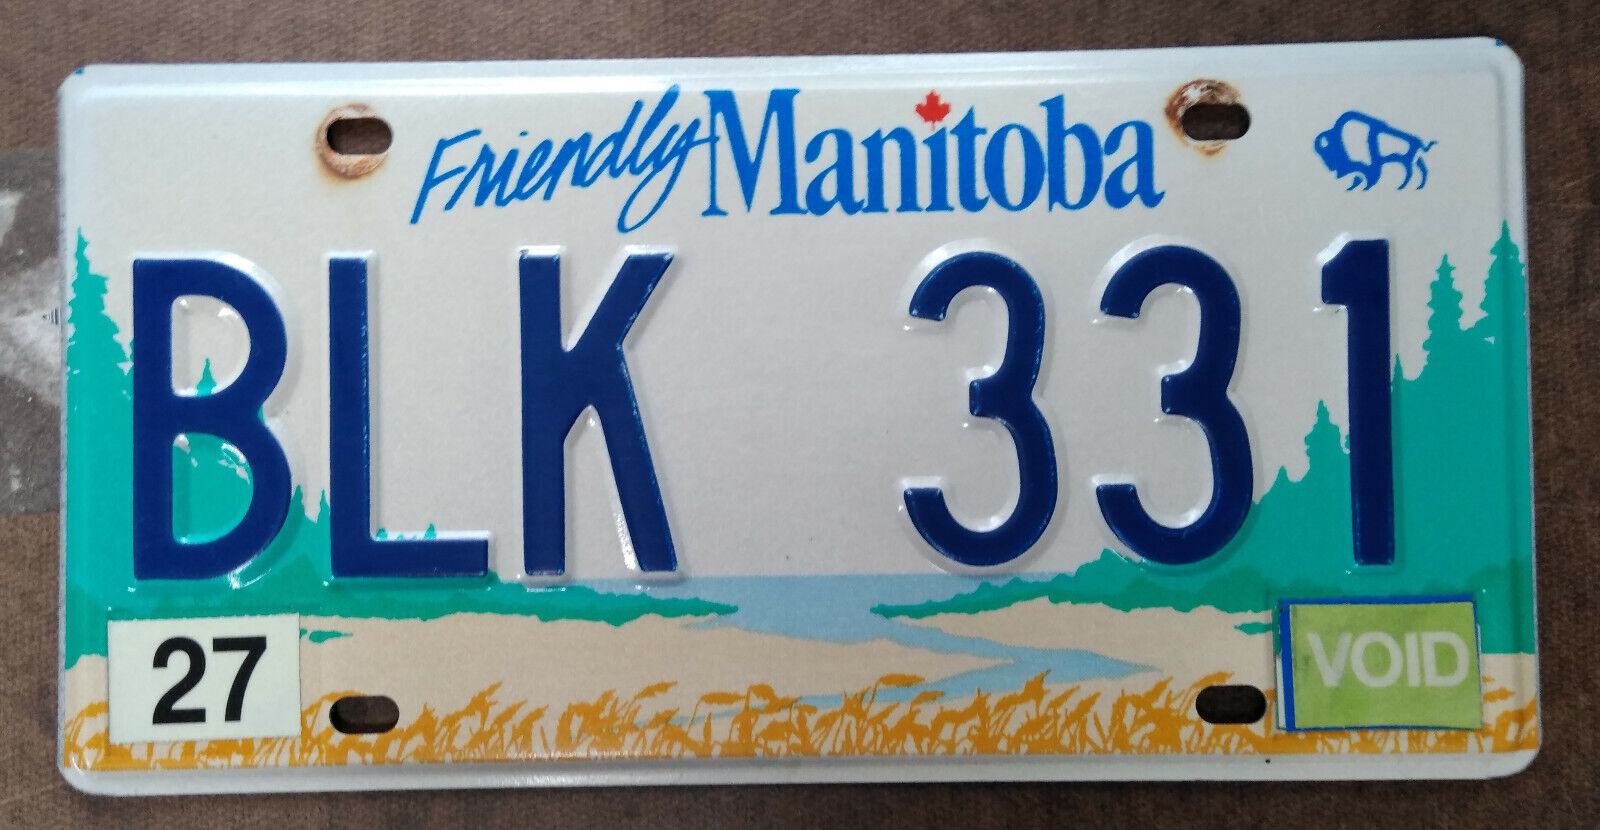 Friendly Manitoba expired 2011? License Plate ~ BLK 331 ~ embossed